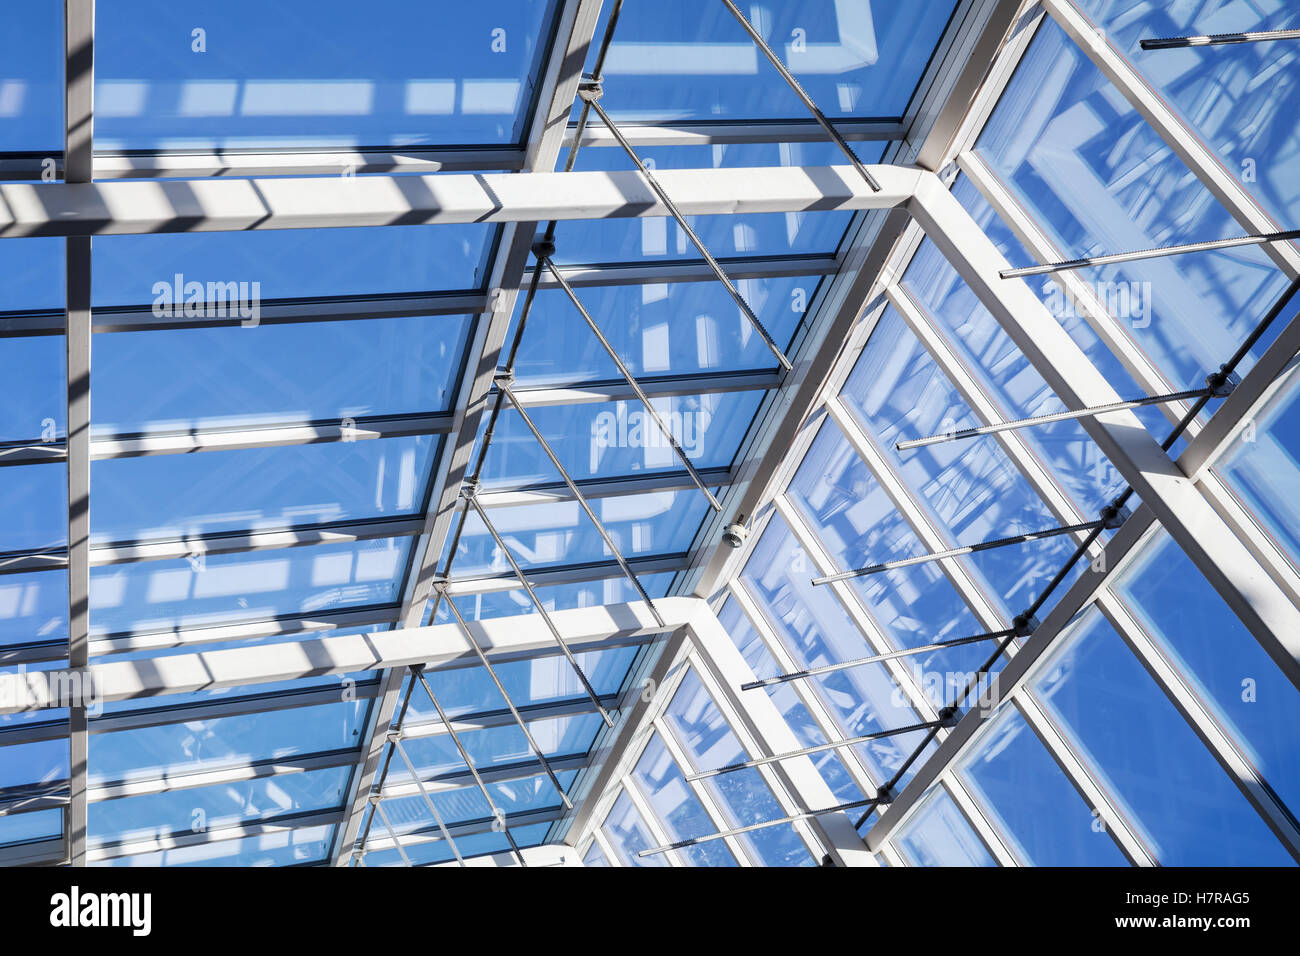 Abstract high-tech architecture background, internal structure of glass roof arch with lockable windows sections Stock Photo